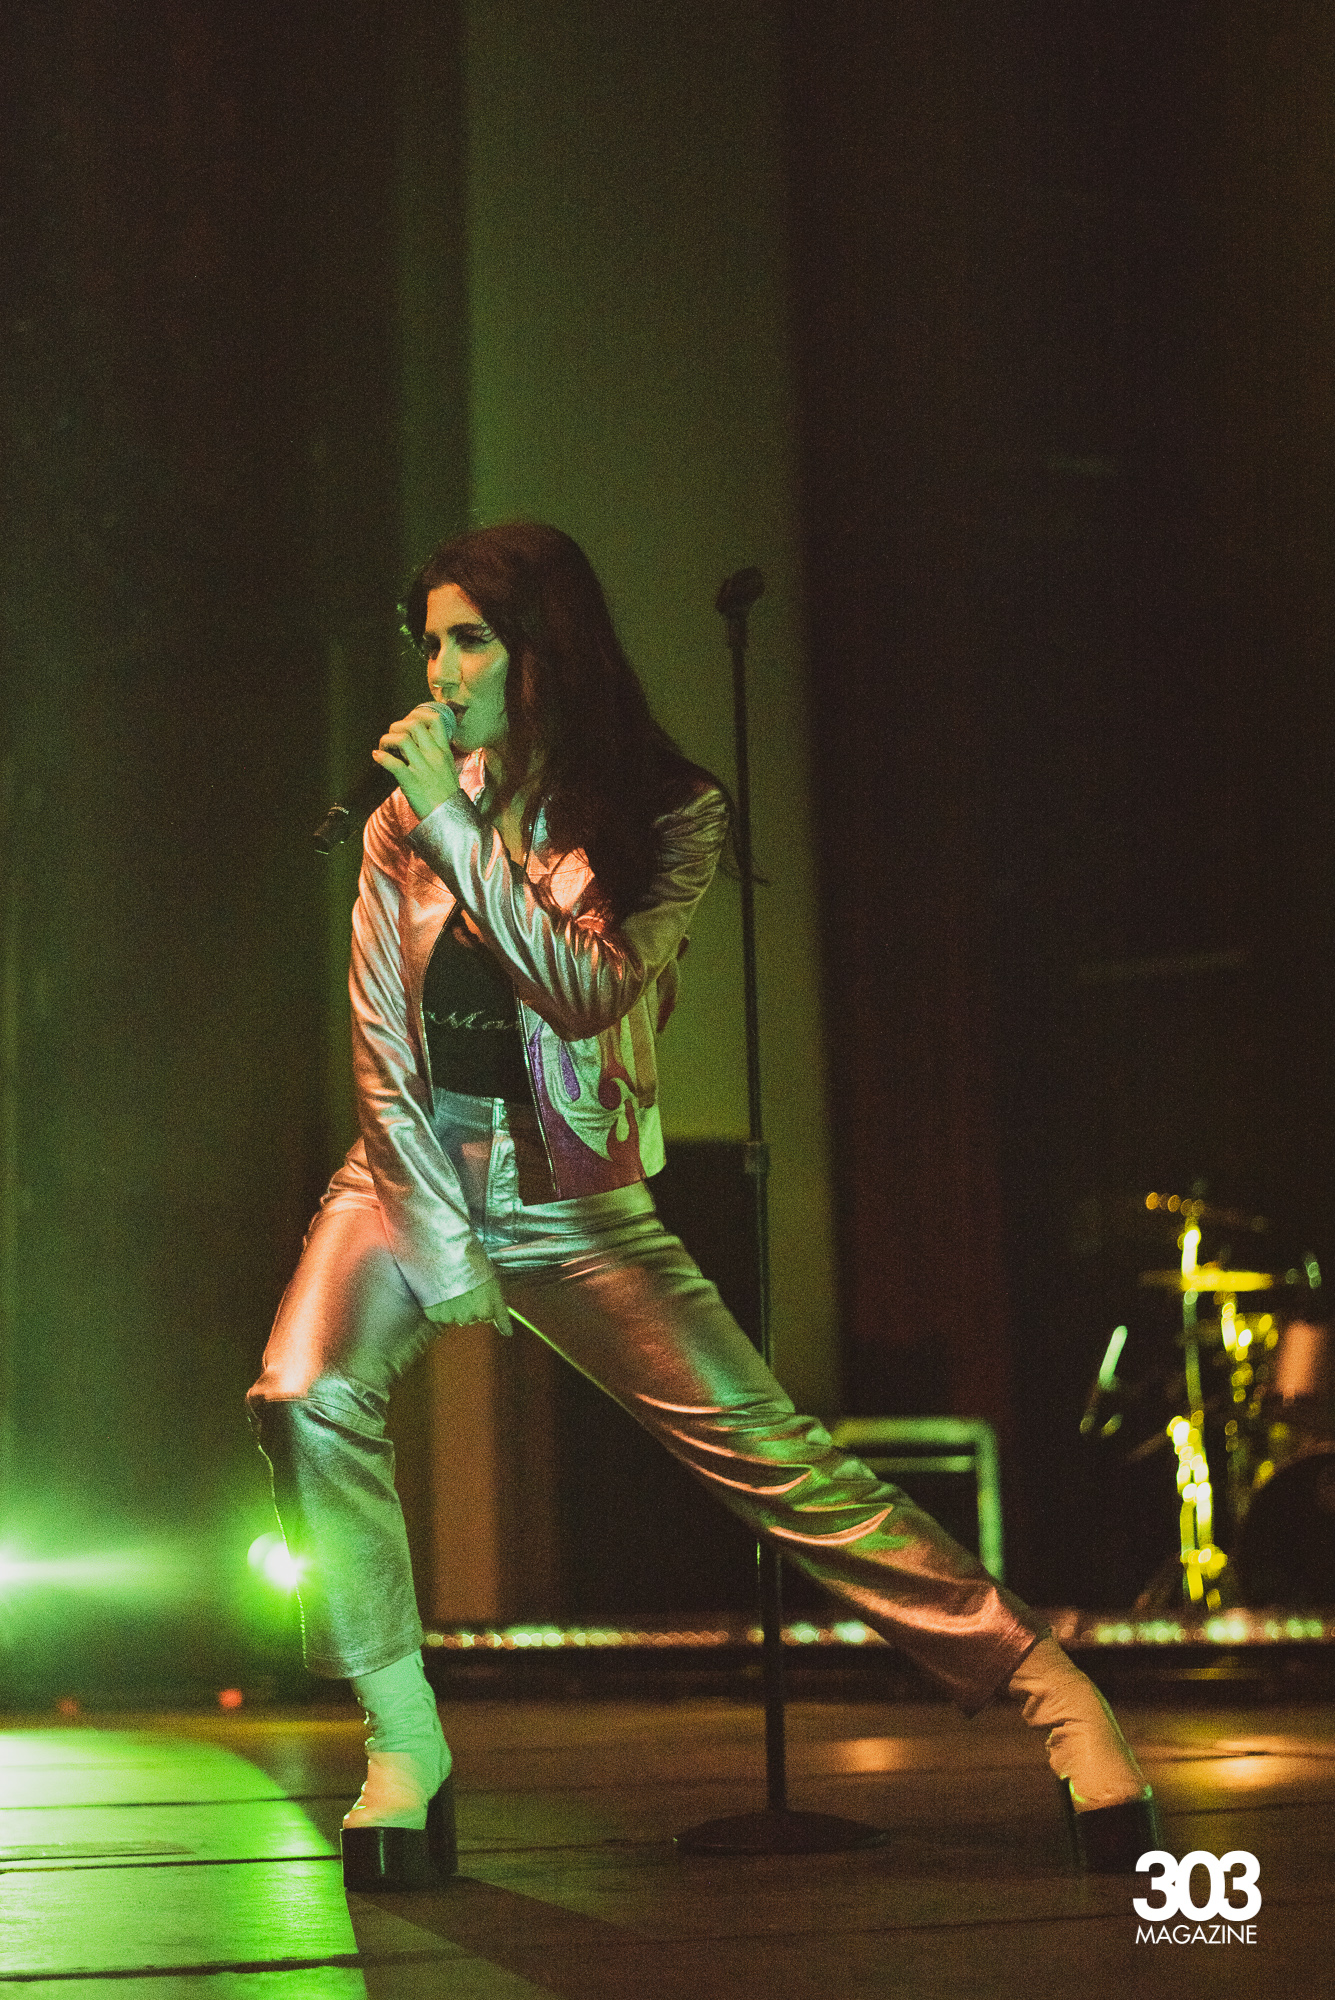 303 Magazine, Music, Concert Review, MARINA, Paramount Theatre, Christian Garcia, Roxanna Carrasco, Ancient Dreams In a Modern Land, Marina and the Diamonds, Electra Heart, Froot